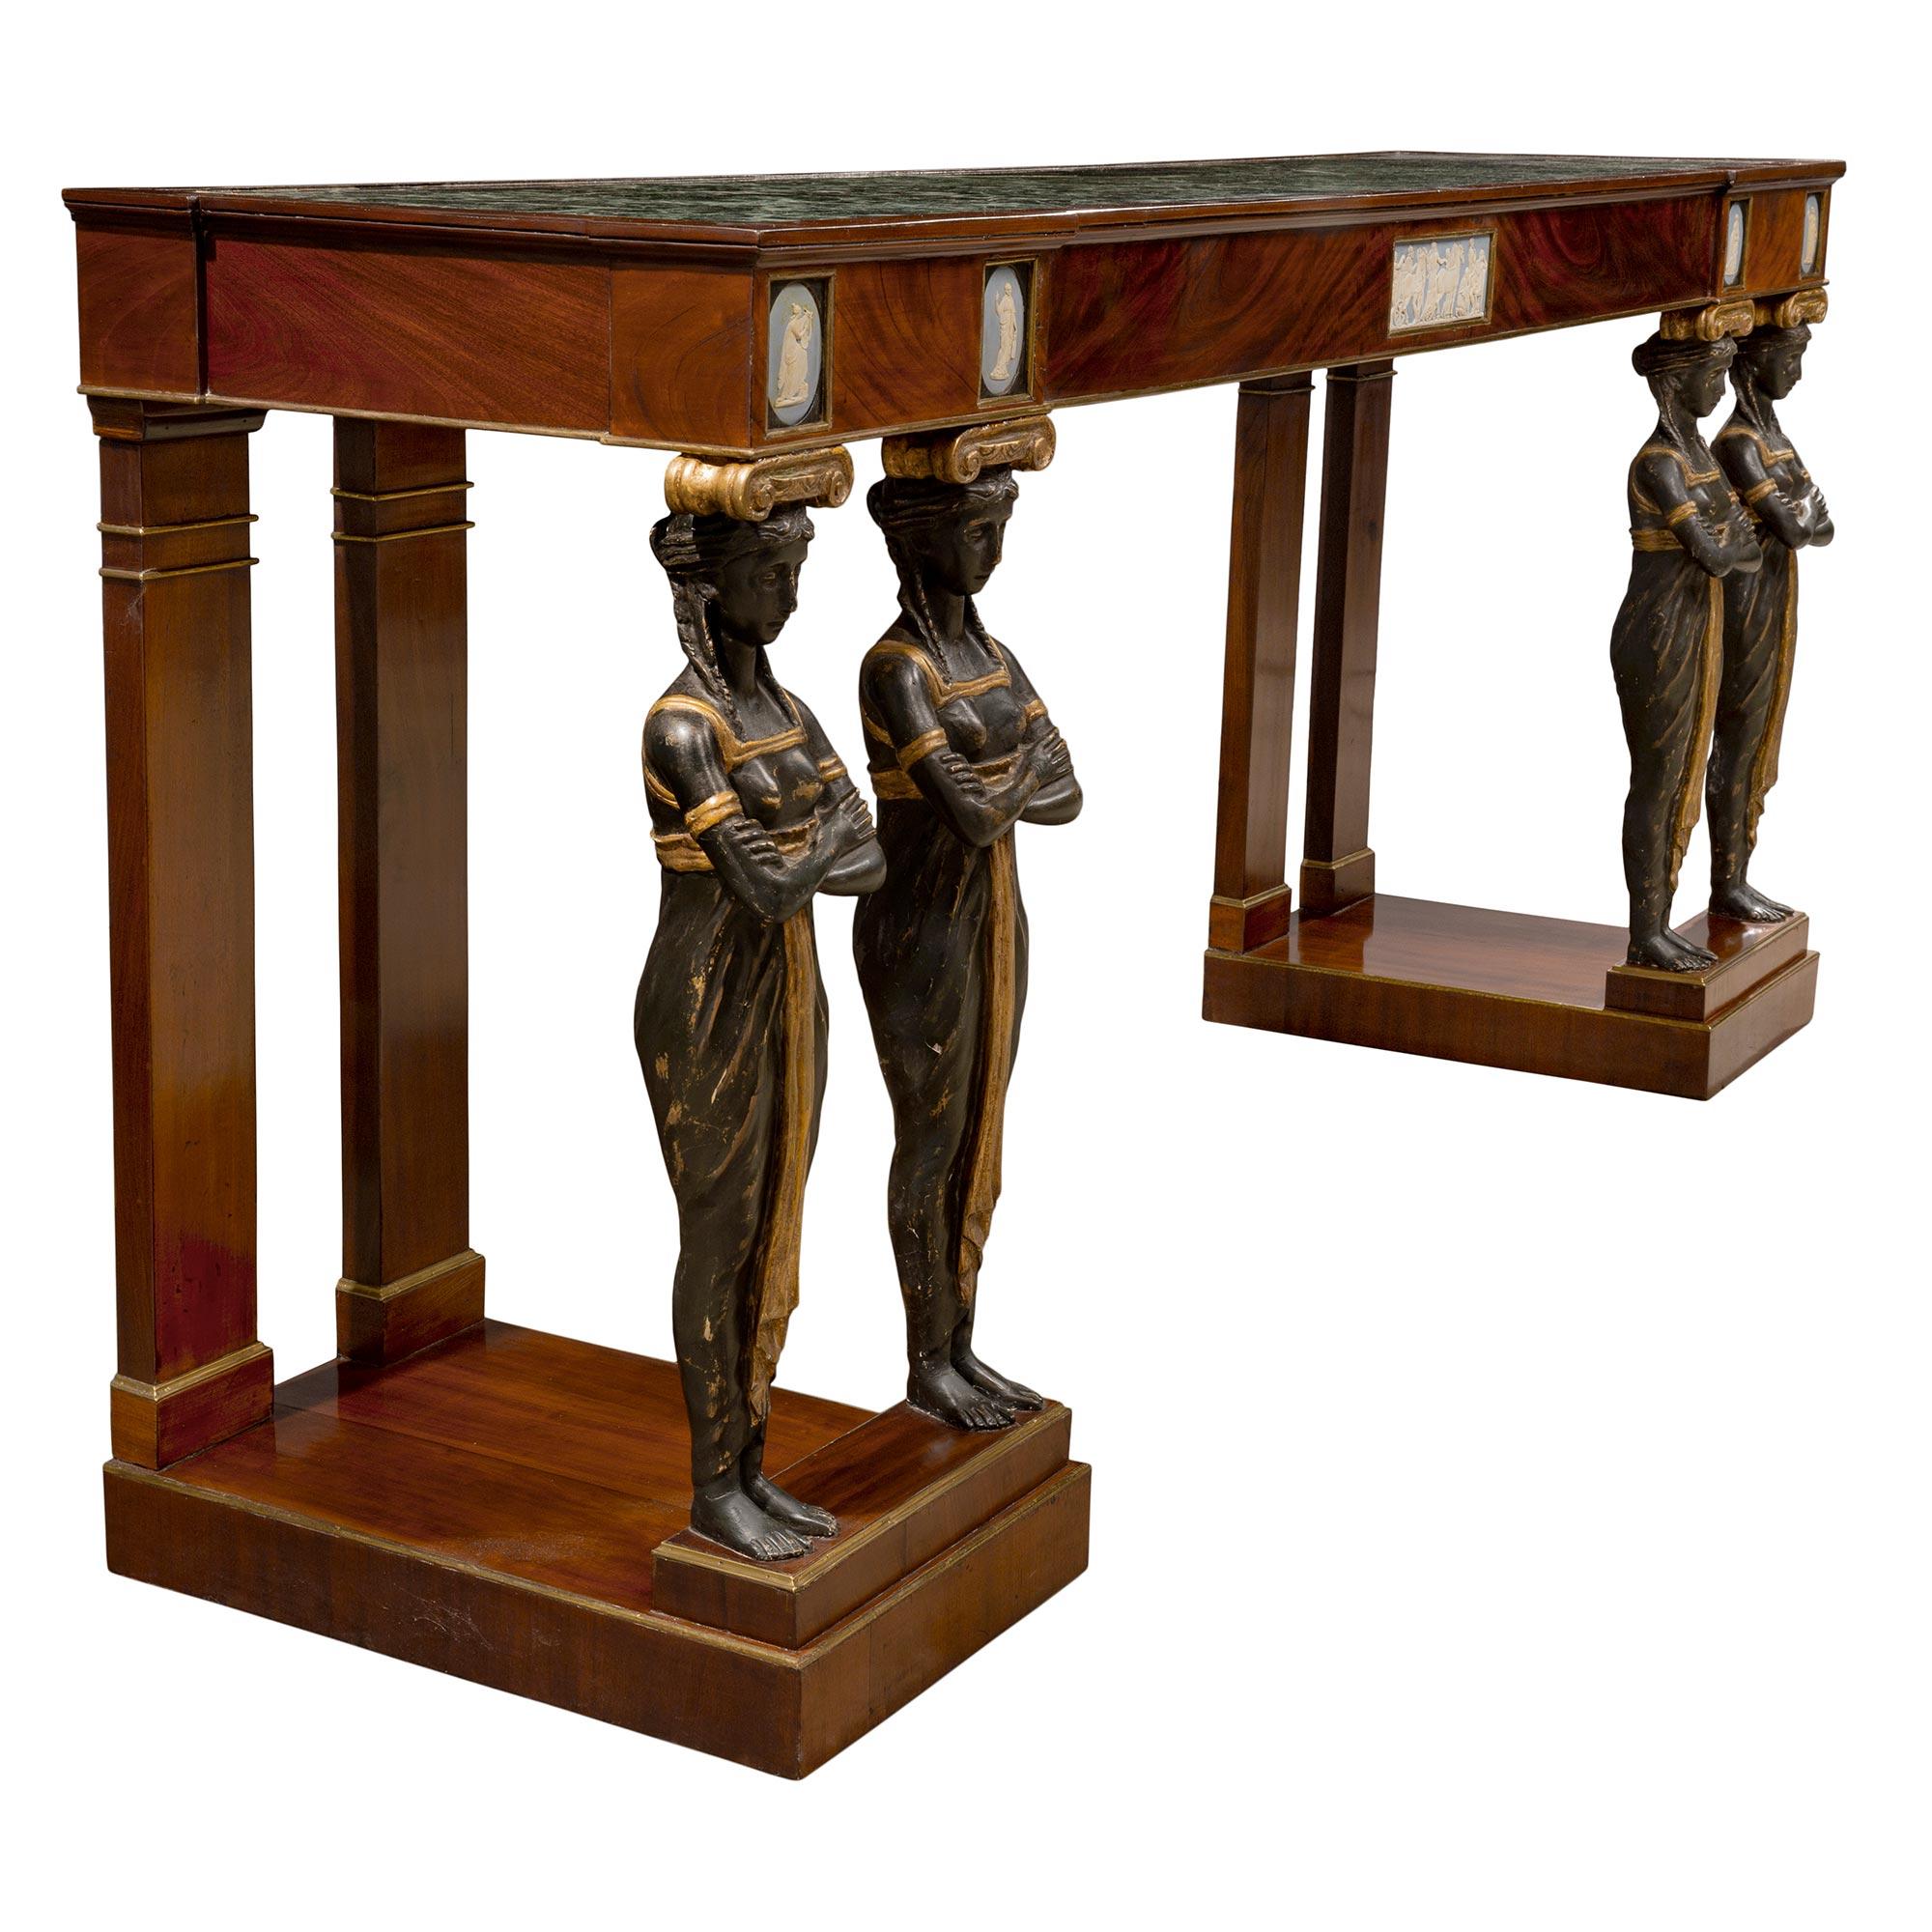 Pair of Italian Mid-19th Century Empire Style Mahogany Consoles from Naples In Good Condition For Sale In West Palm Beach, FL